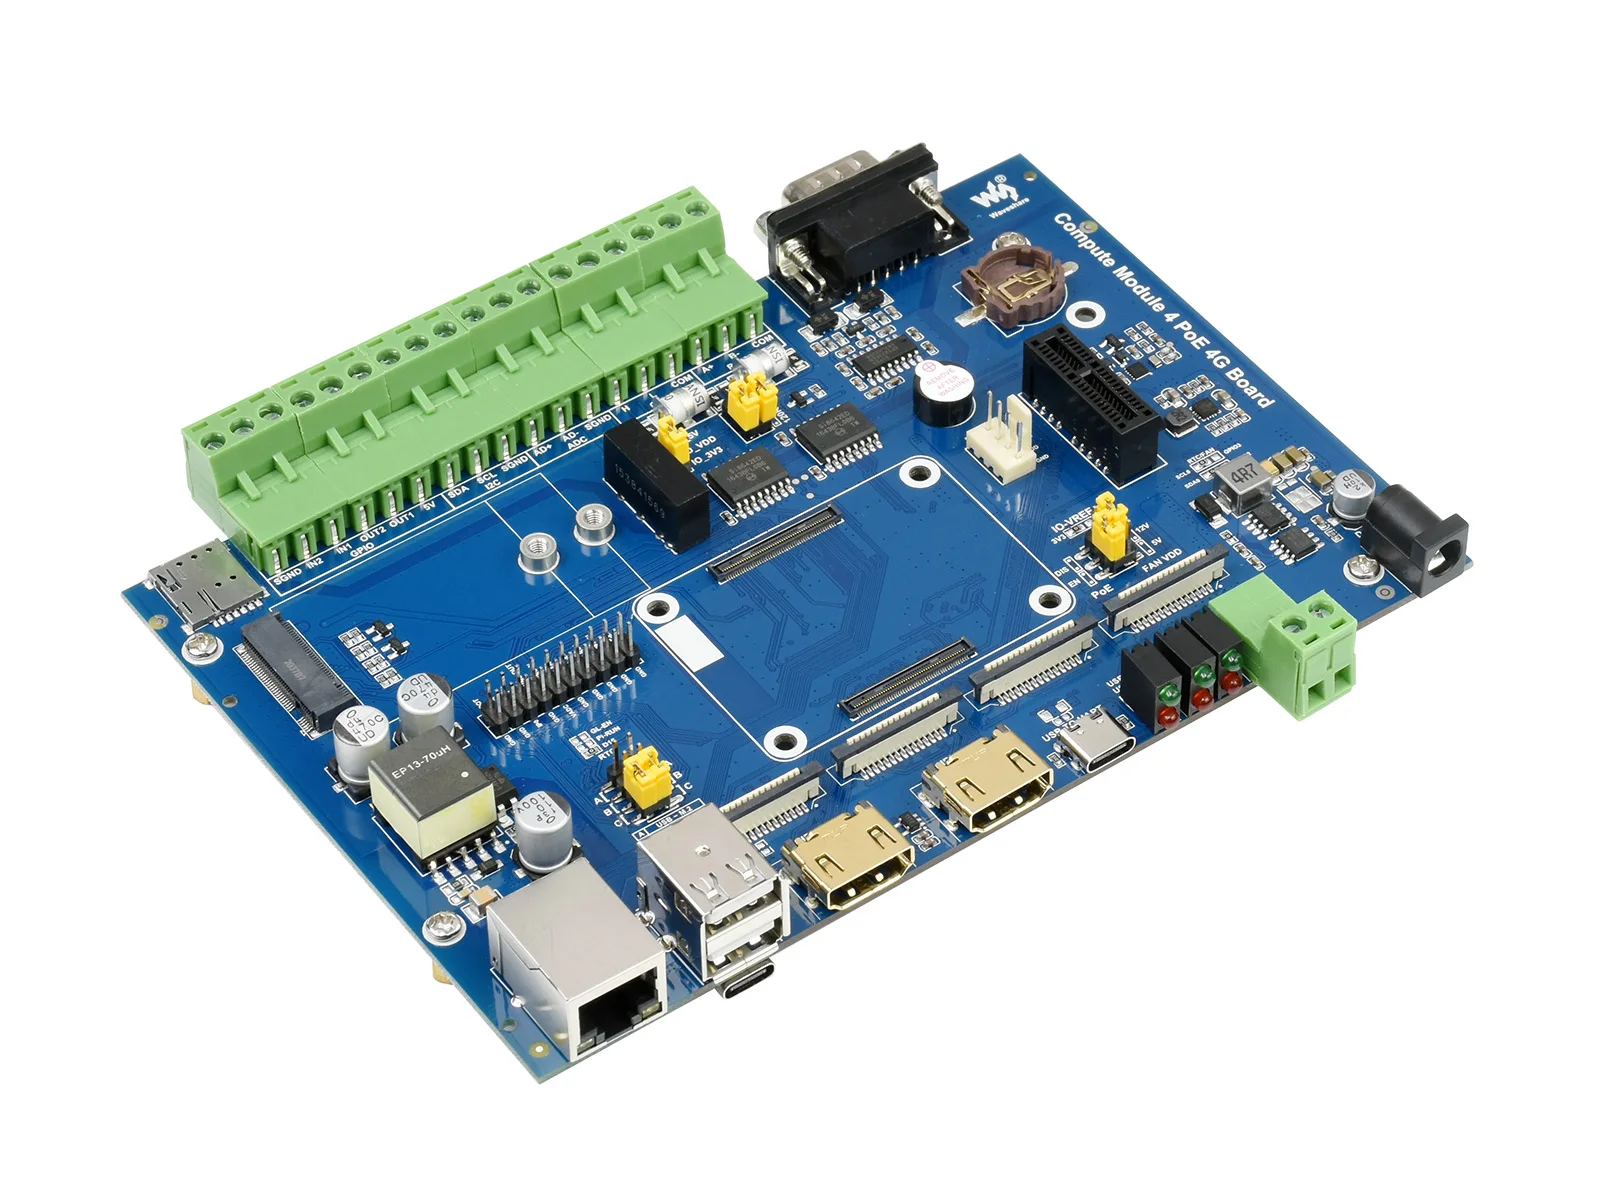 Compute Module 4 Industrial IoT Base Board, For Raspberry Pi CM4(not included), Global 5G/4G/3G/2G Cellular Network Support